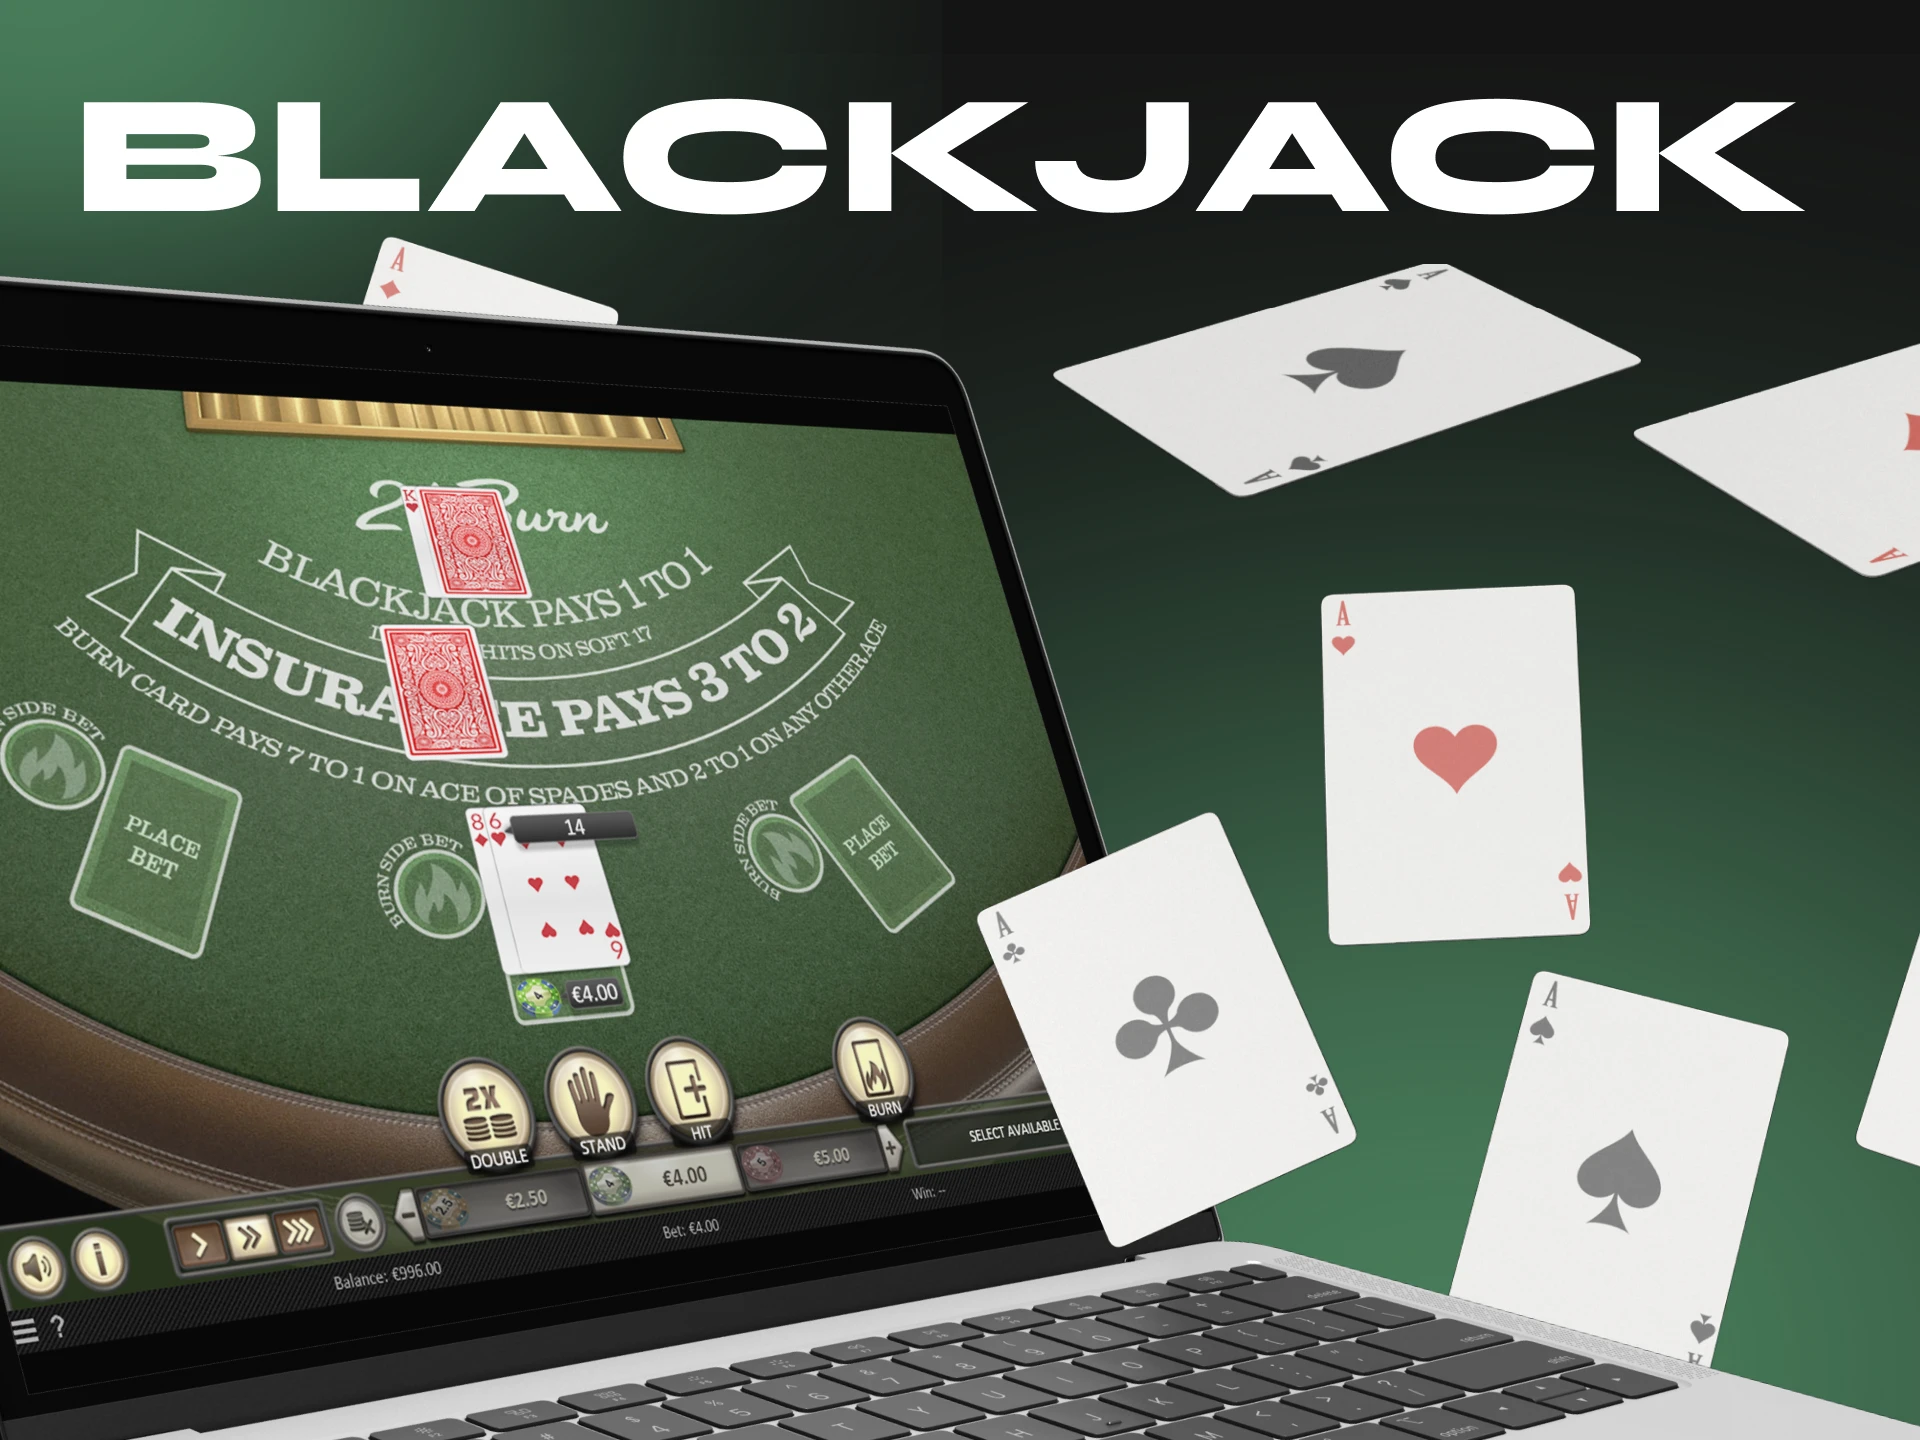 At a crypto casinos you can play blackjack.